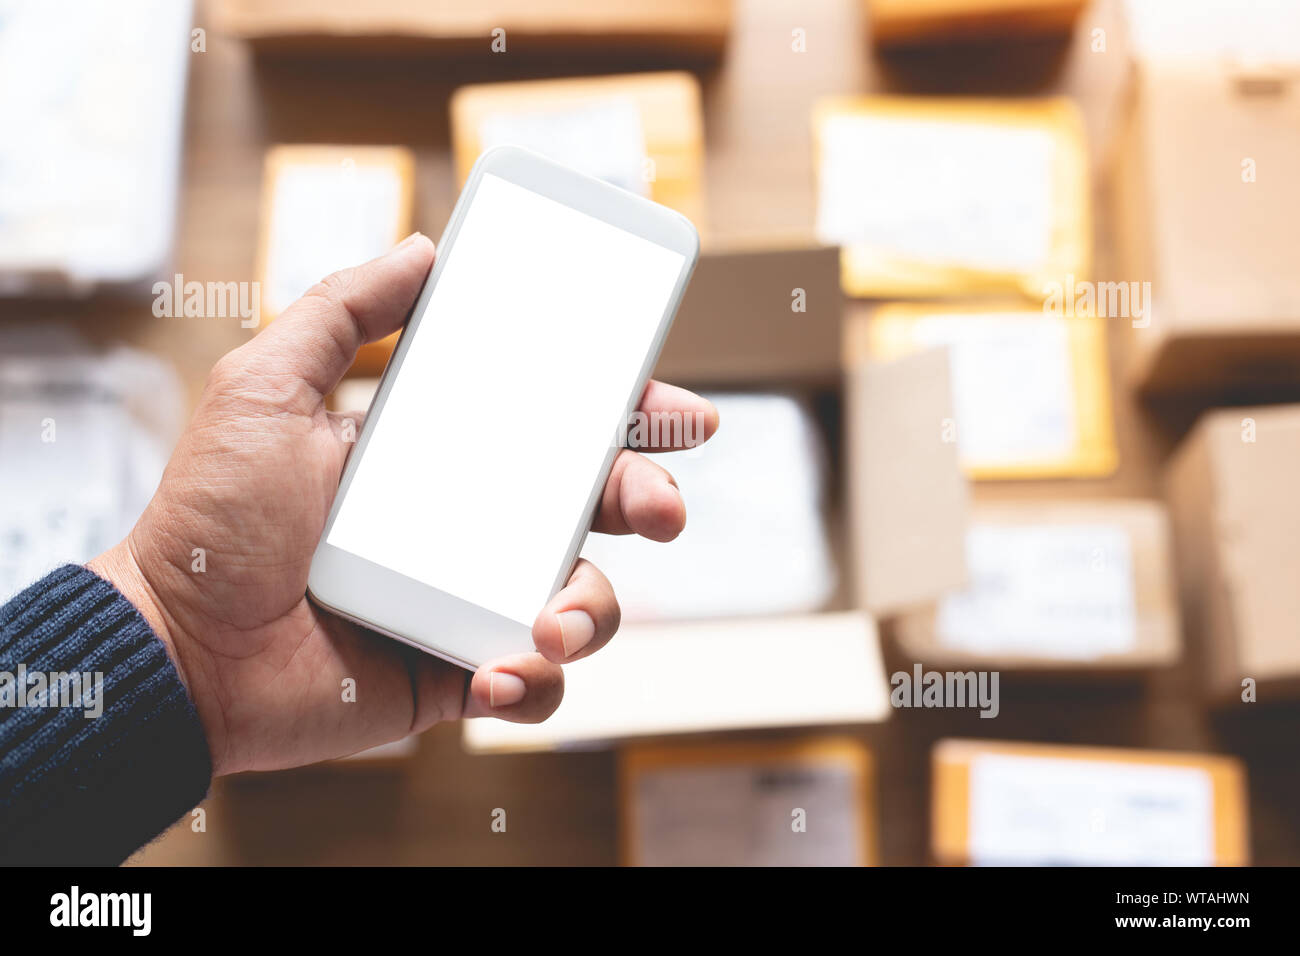 Online shopping concepts with youngman using smartphone on a lot of packag box.Ecommerce marke.Transportation logistic.Business retail market Stock Photo